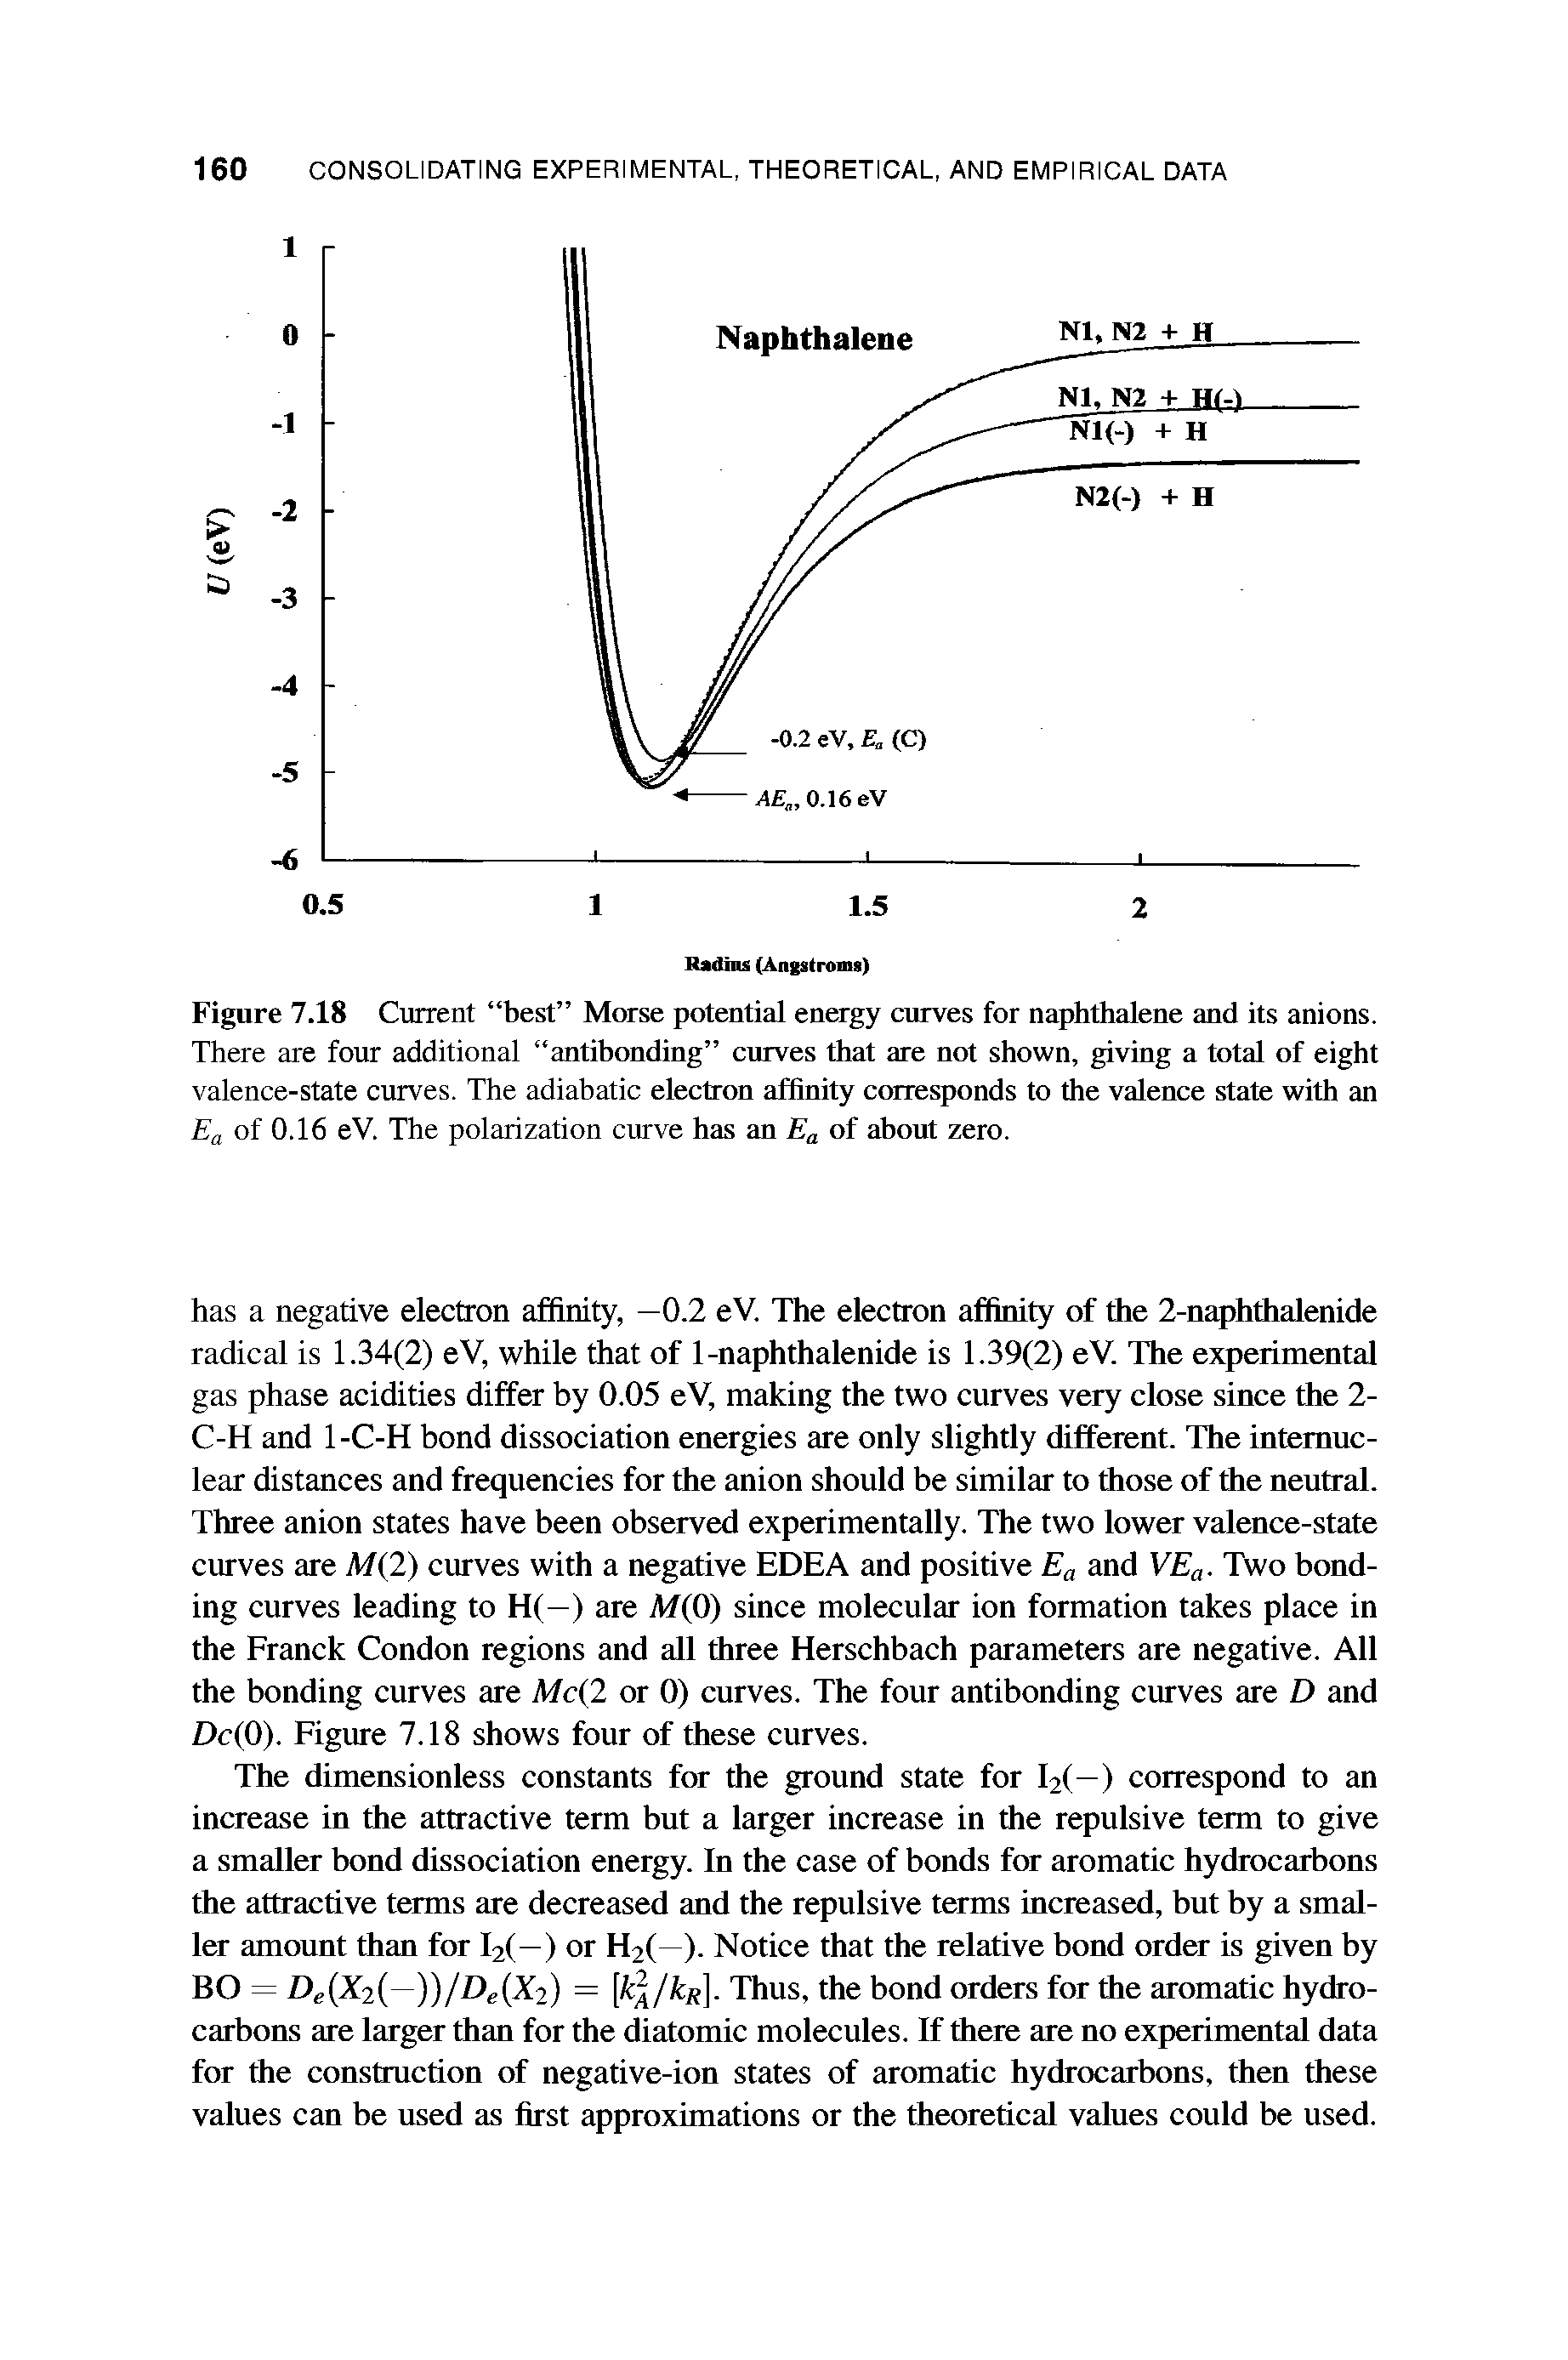 Figure 7.18 Current best Morse potential energy curves for naphthalene and its anions. There are four additional antibonding curves that are not shown, giving a total of eight valence-state curves. The adiabatic electron affinity corresponds to the valence state with an Ea of 0.16 eV. The polarization curve has an Ea of about zero.